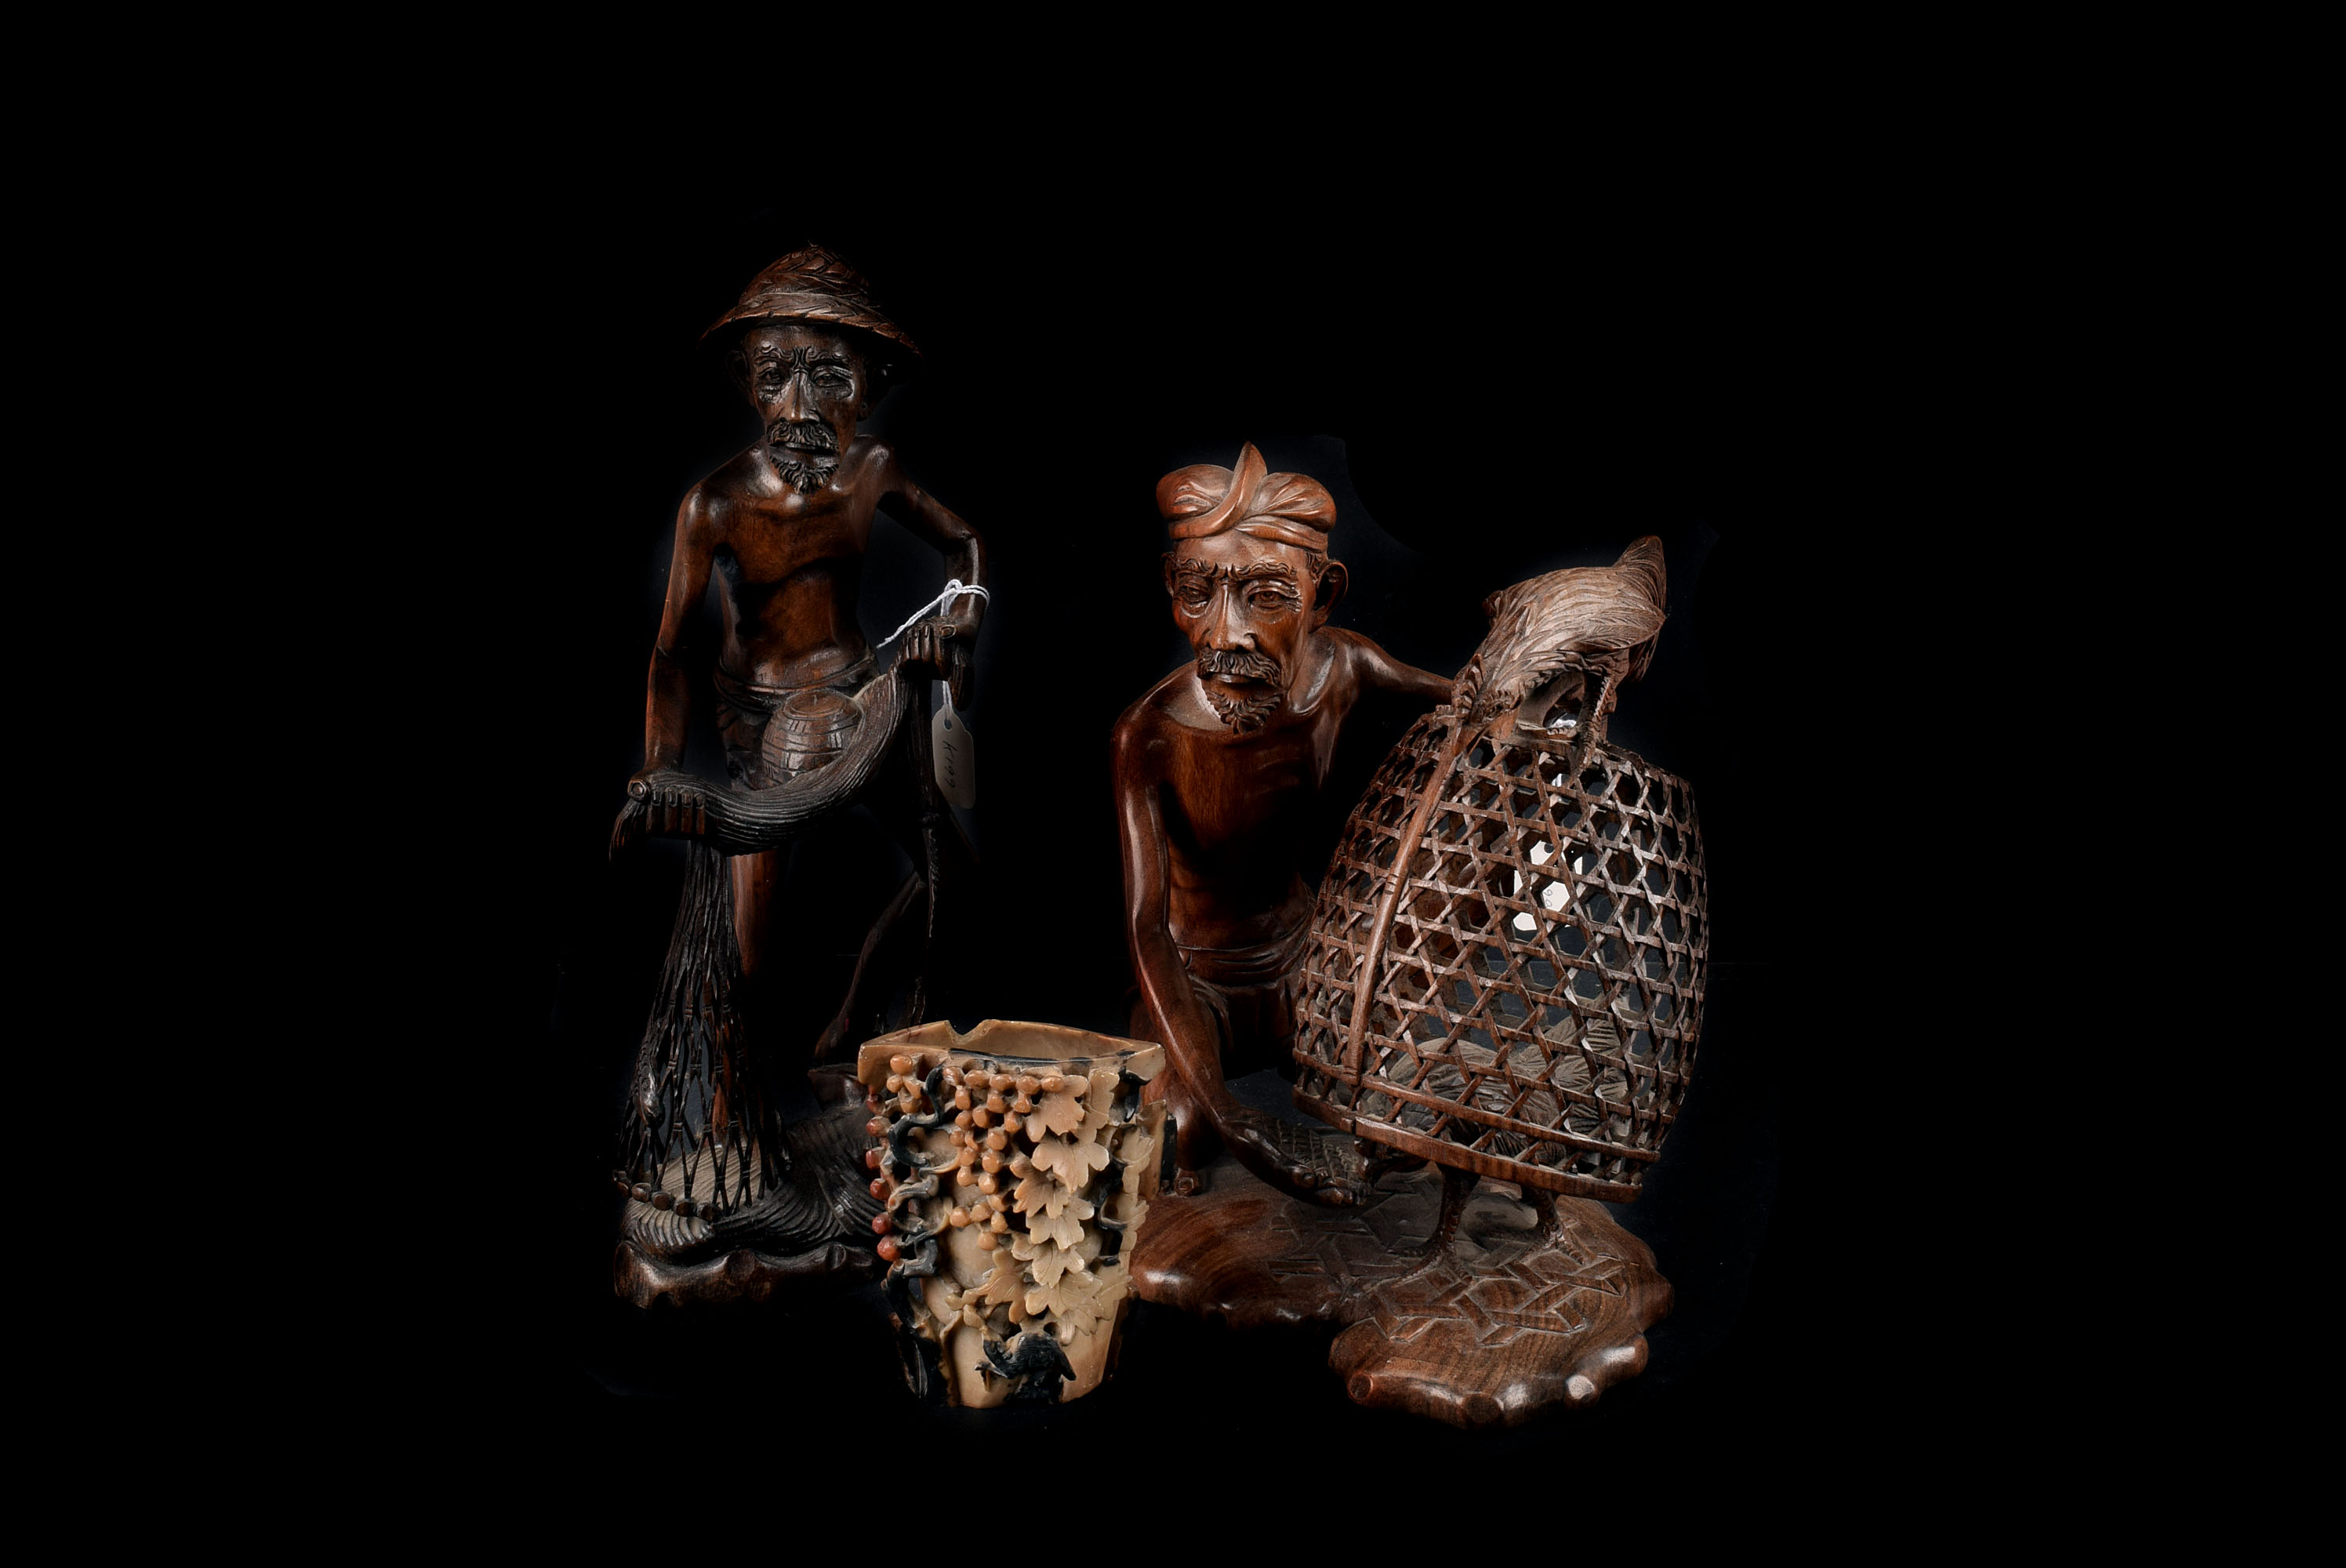 Two ornate wooden carvings, one of a fisherman with net and the other of a man feeding his chickens,